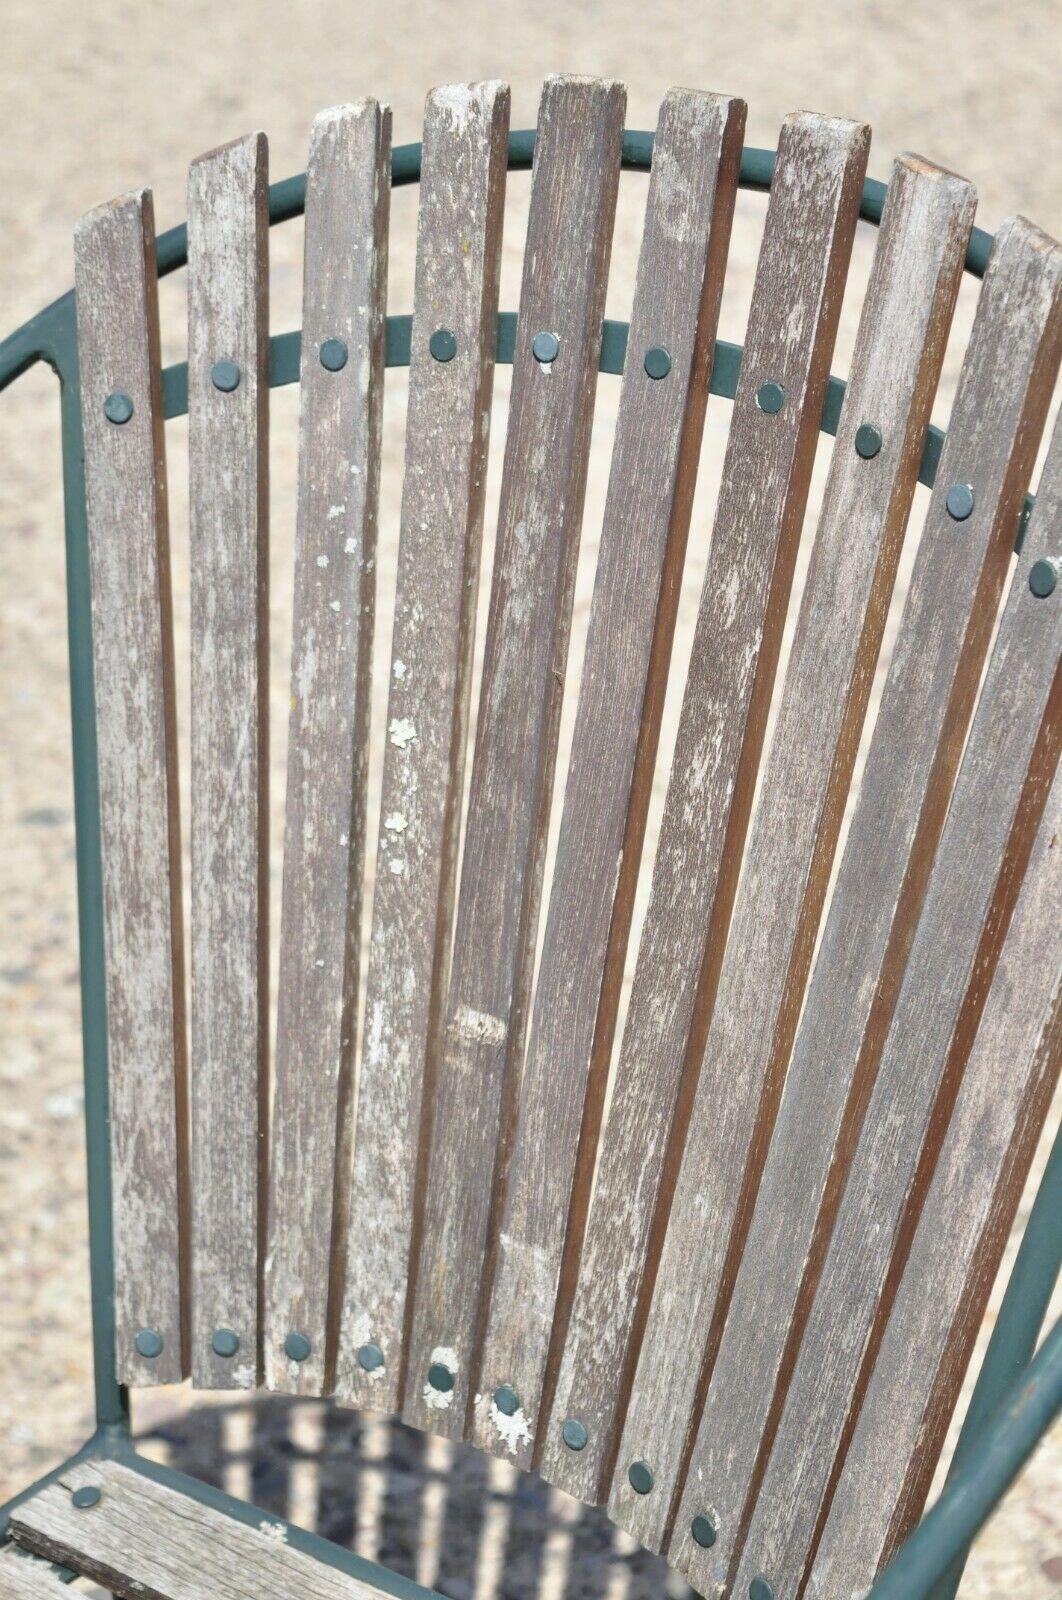 20th Century Vintage Wrought Iron and Wood Slat Garden Patio Dining Arm Chairs - Set of 4